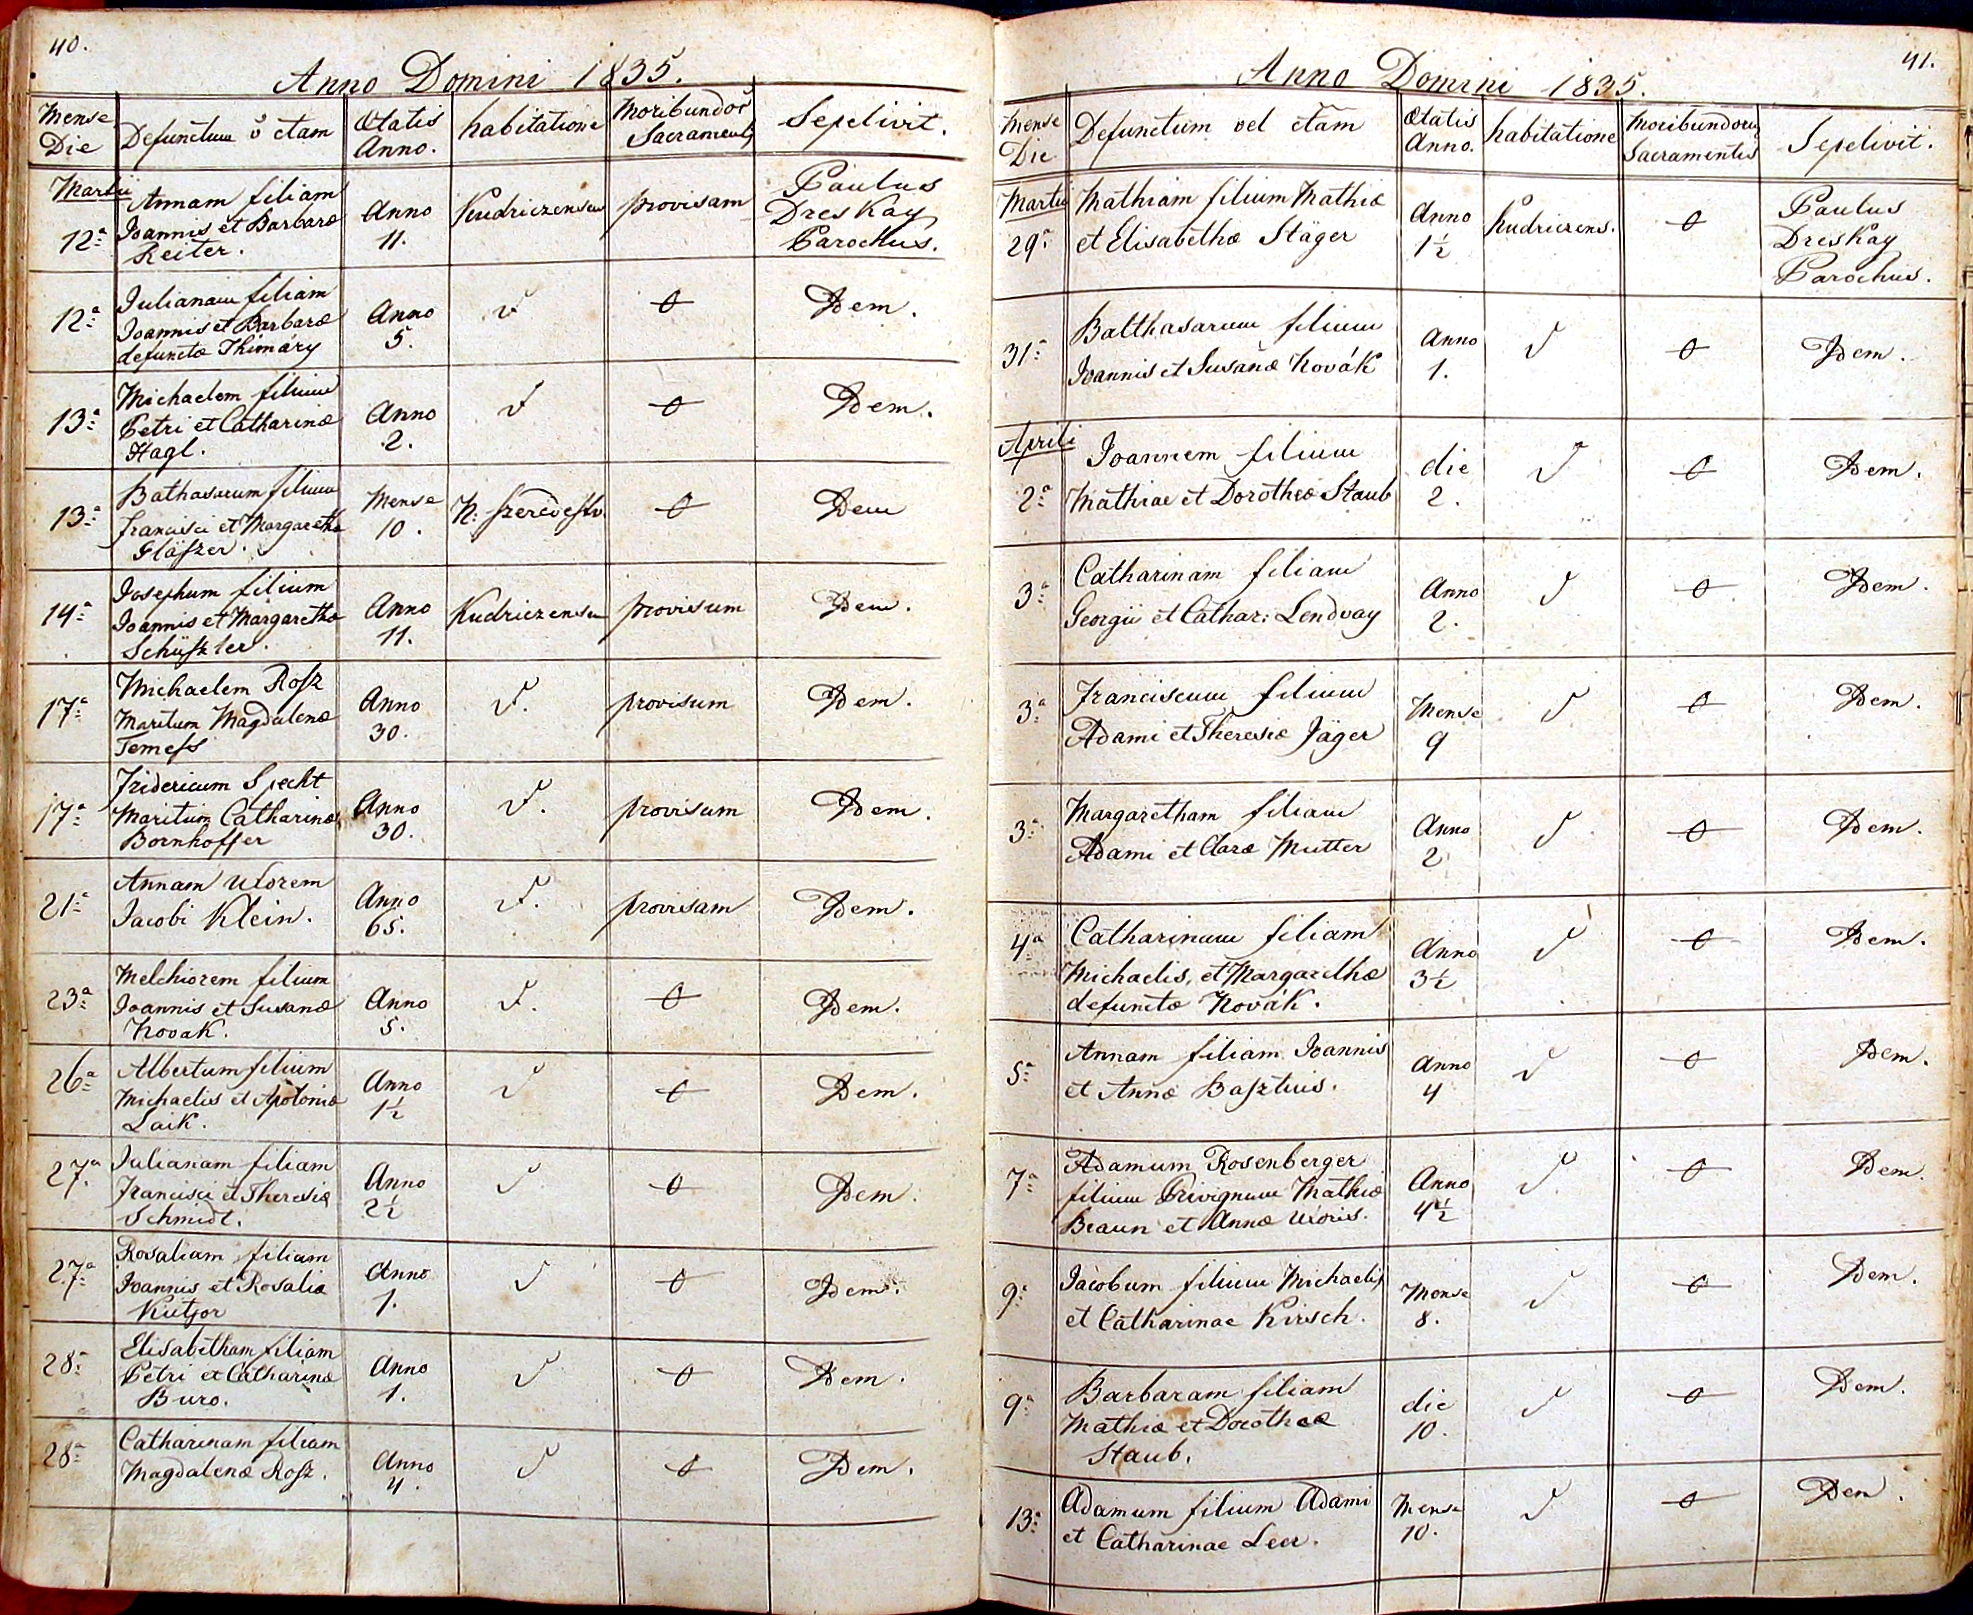 images/church_records/DEATHS/1742-1775D/040 i 041